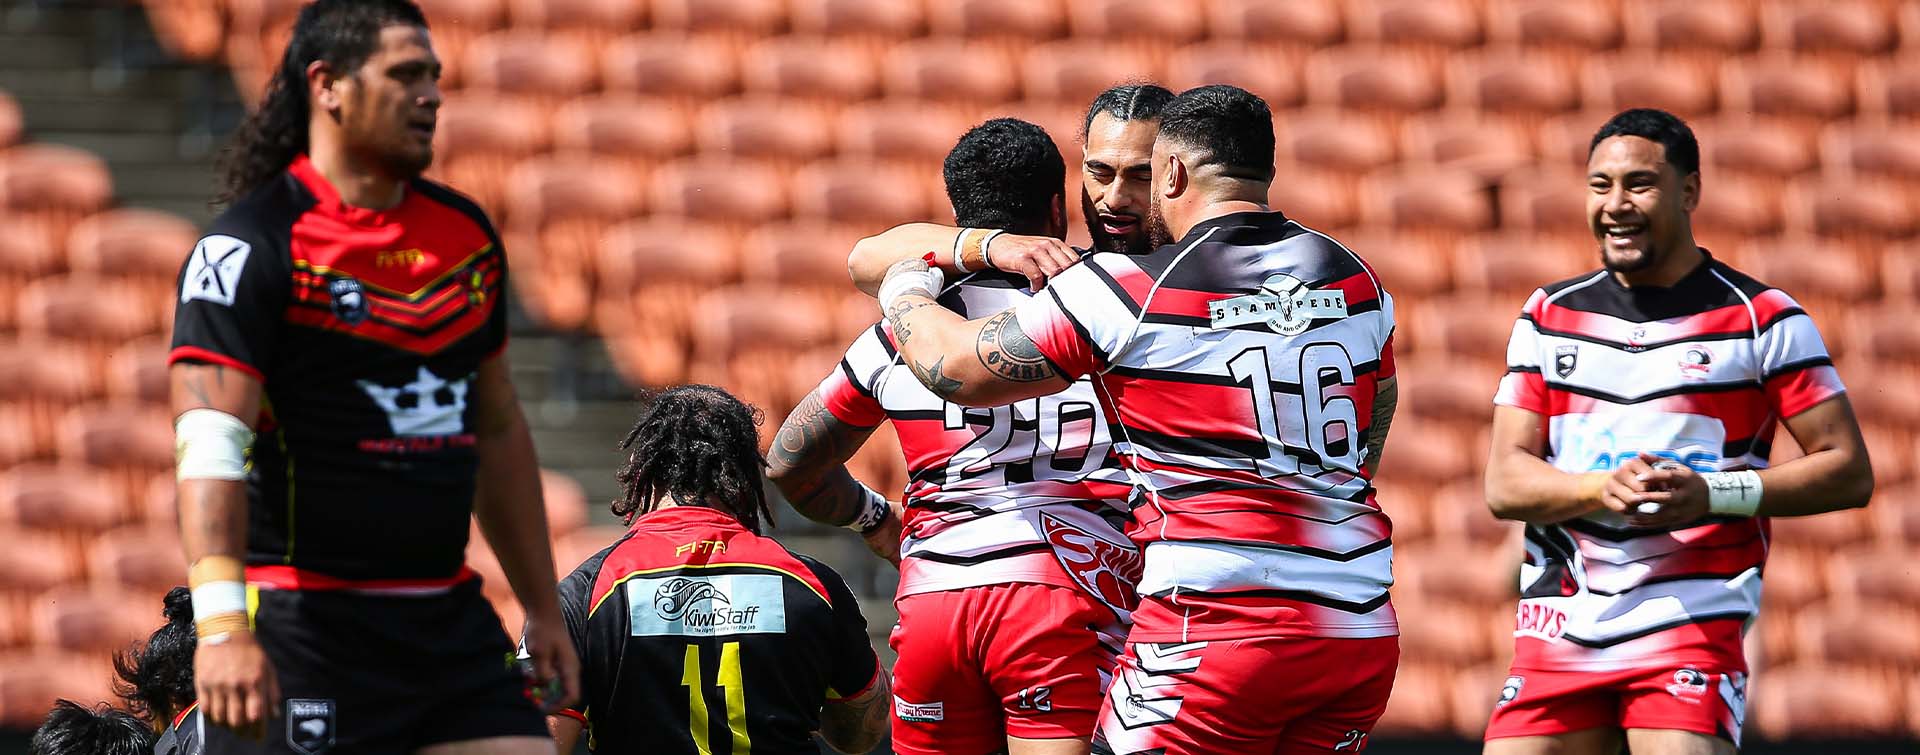 Counties Manukau secure their first win